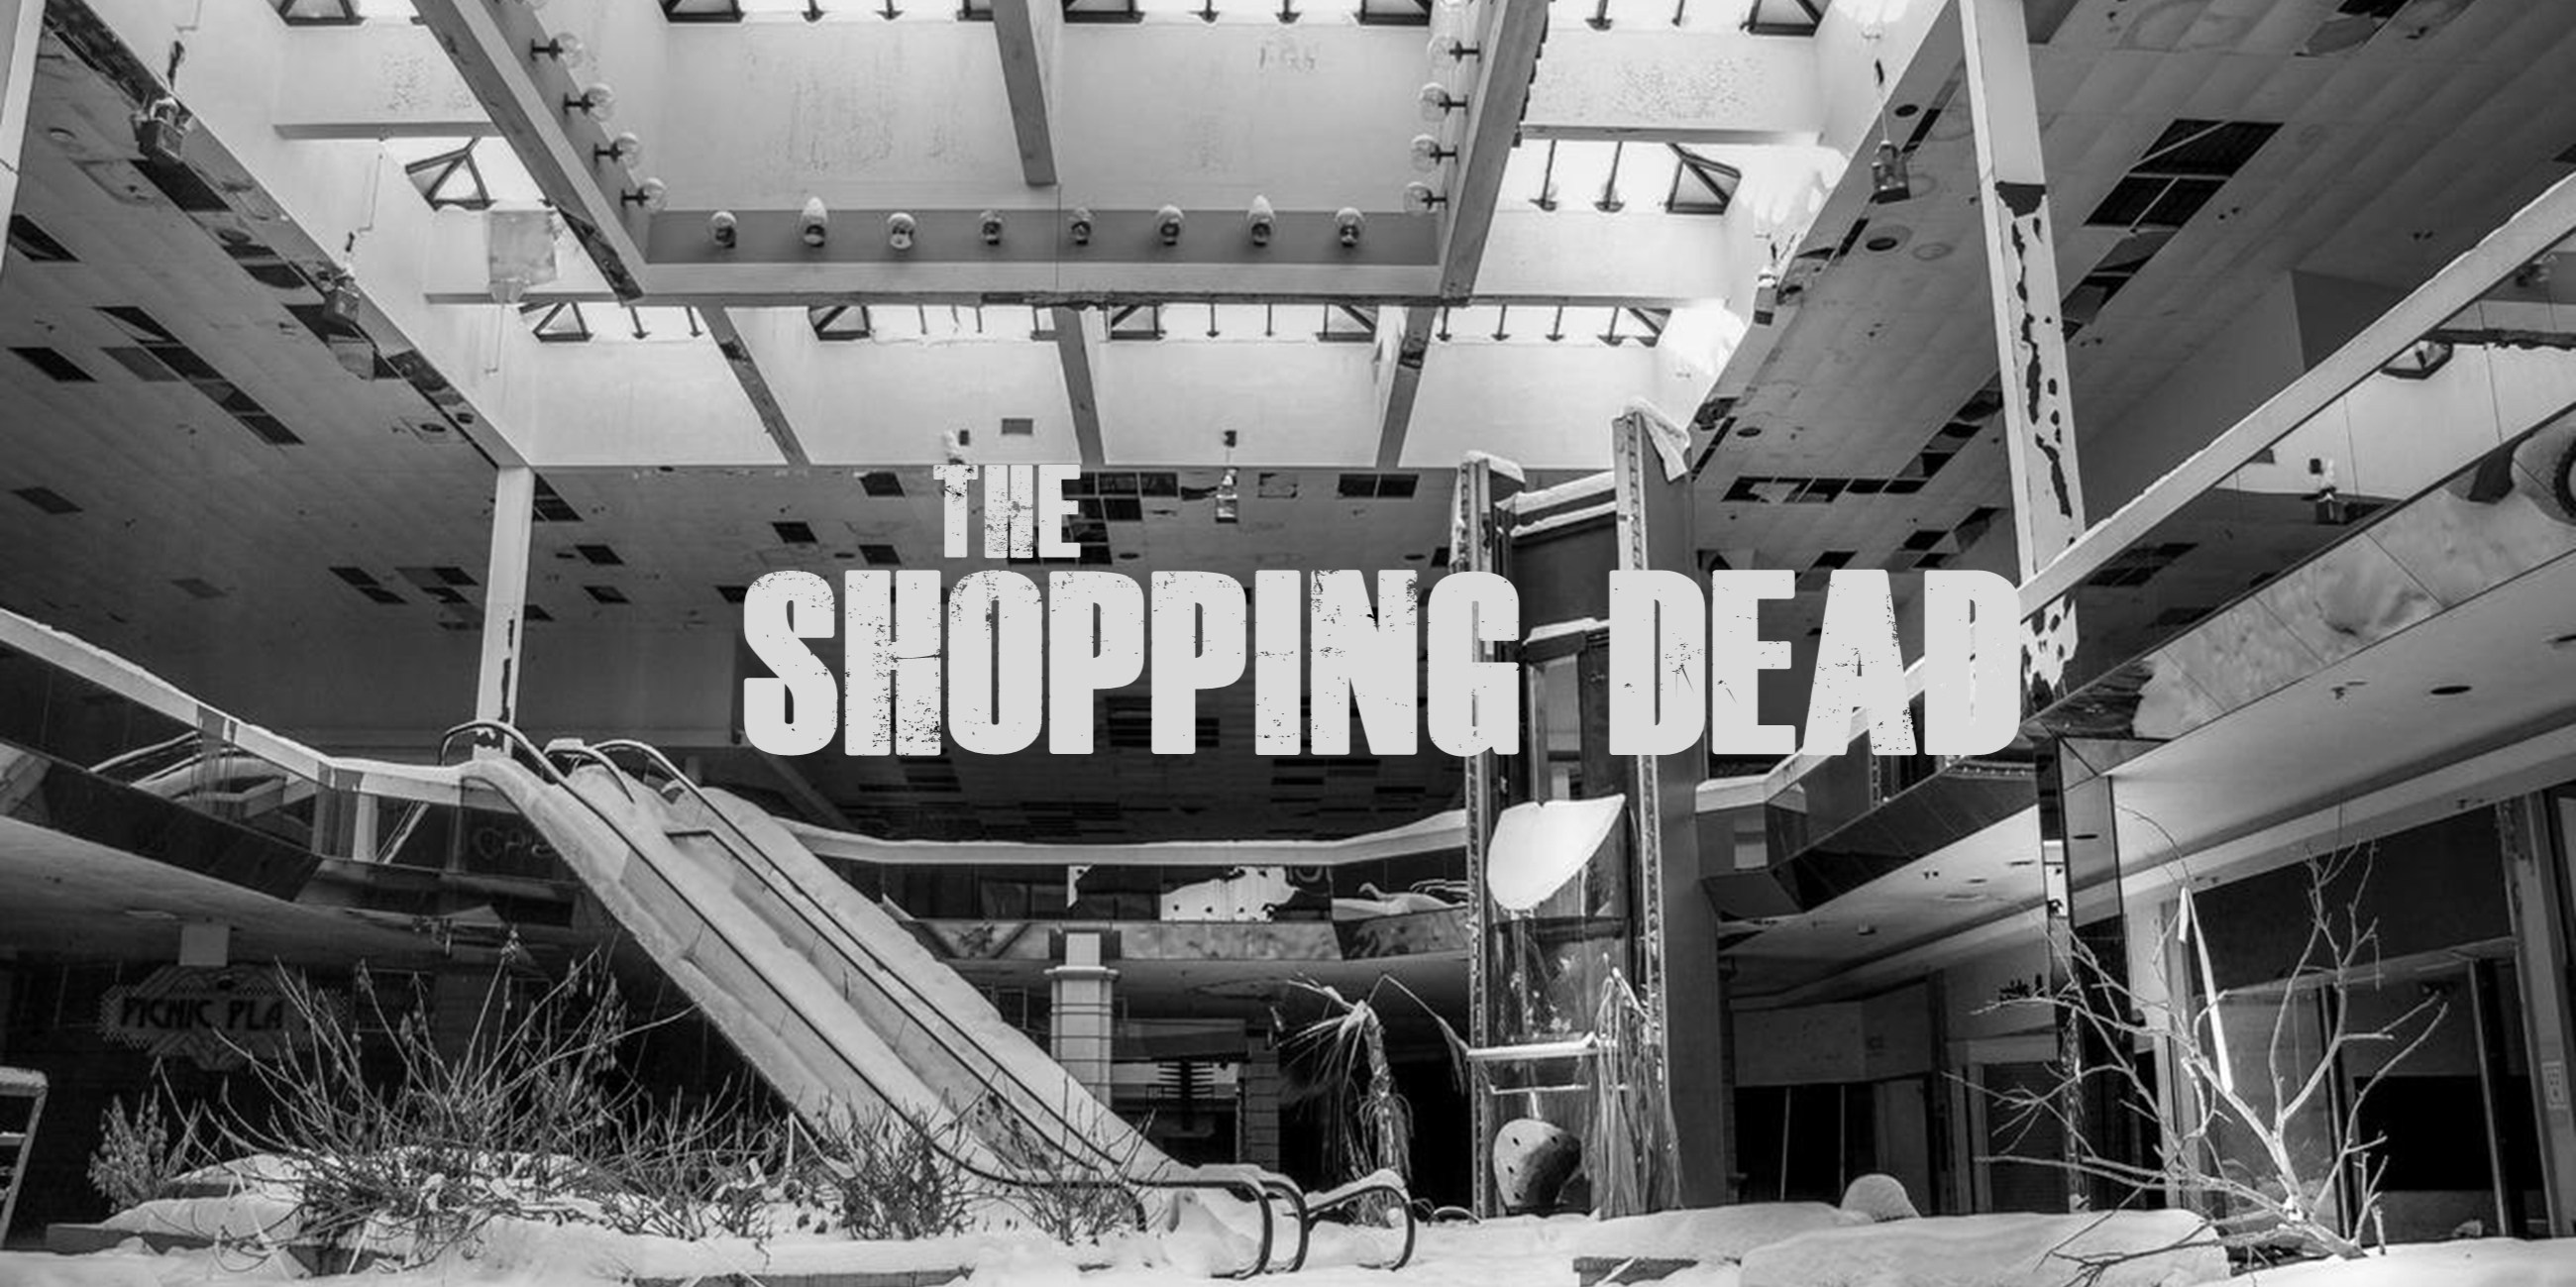 The Shopping Dead